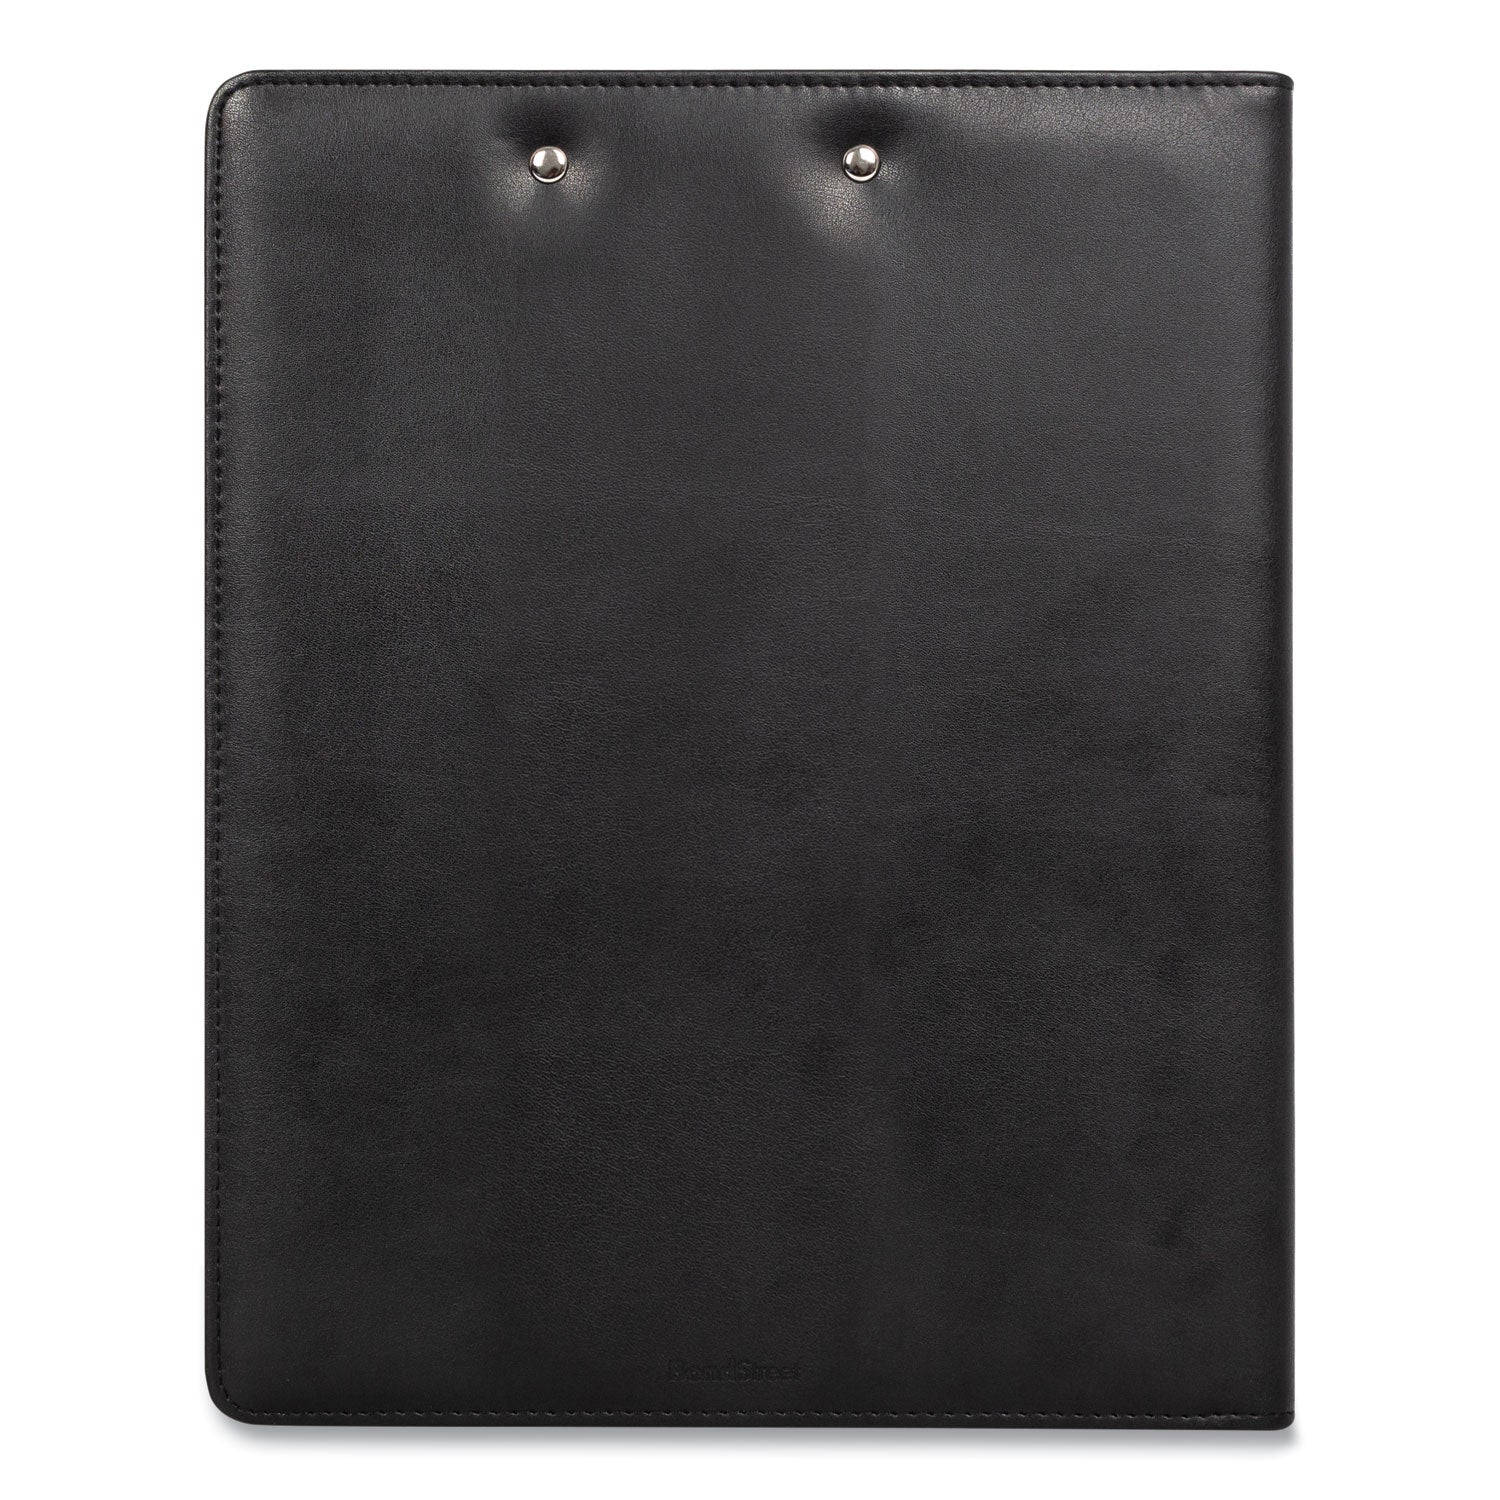 faux-leather-padfolio-notched-front-cover-with-clipboard-fastener-9-x-12-pad-975-x-125-black_bnd5041bsblack - 2